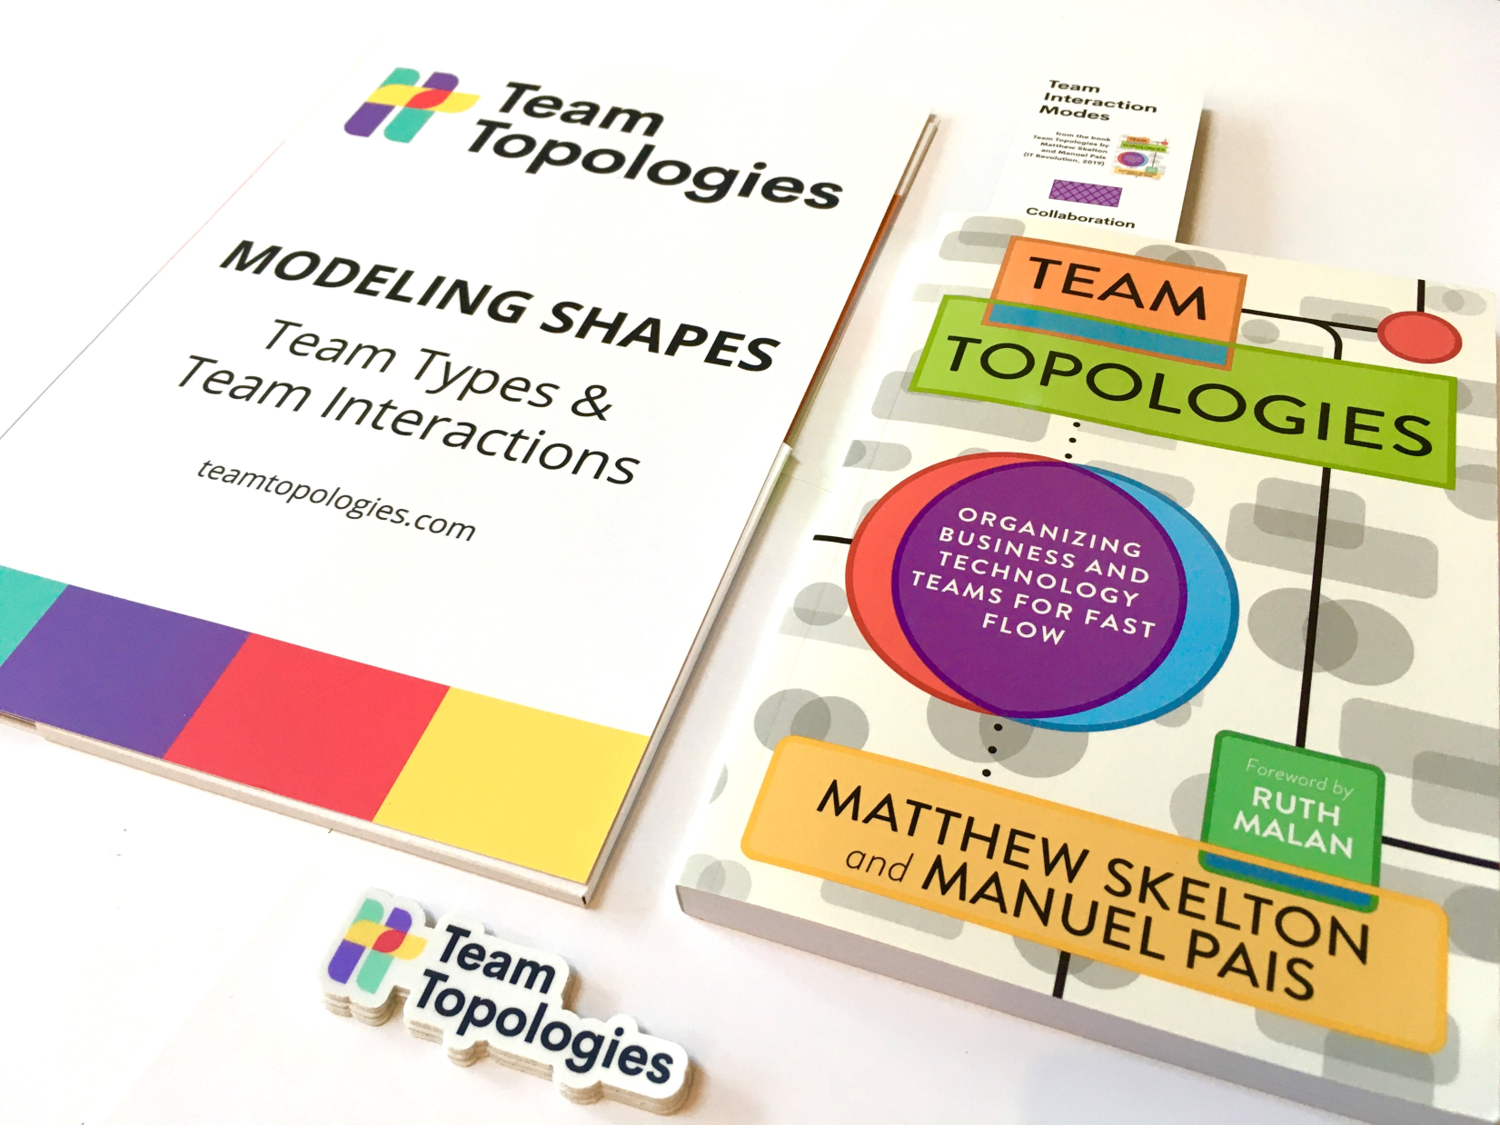 Team Topologies Modeling Shapes for Team Types & Team Interactions